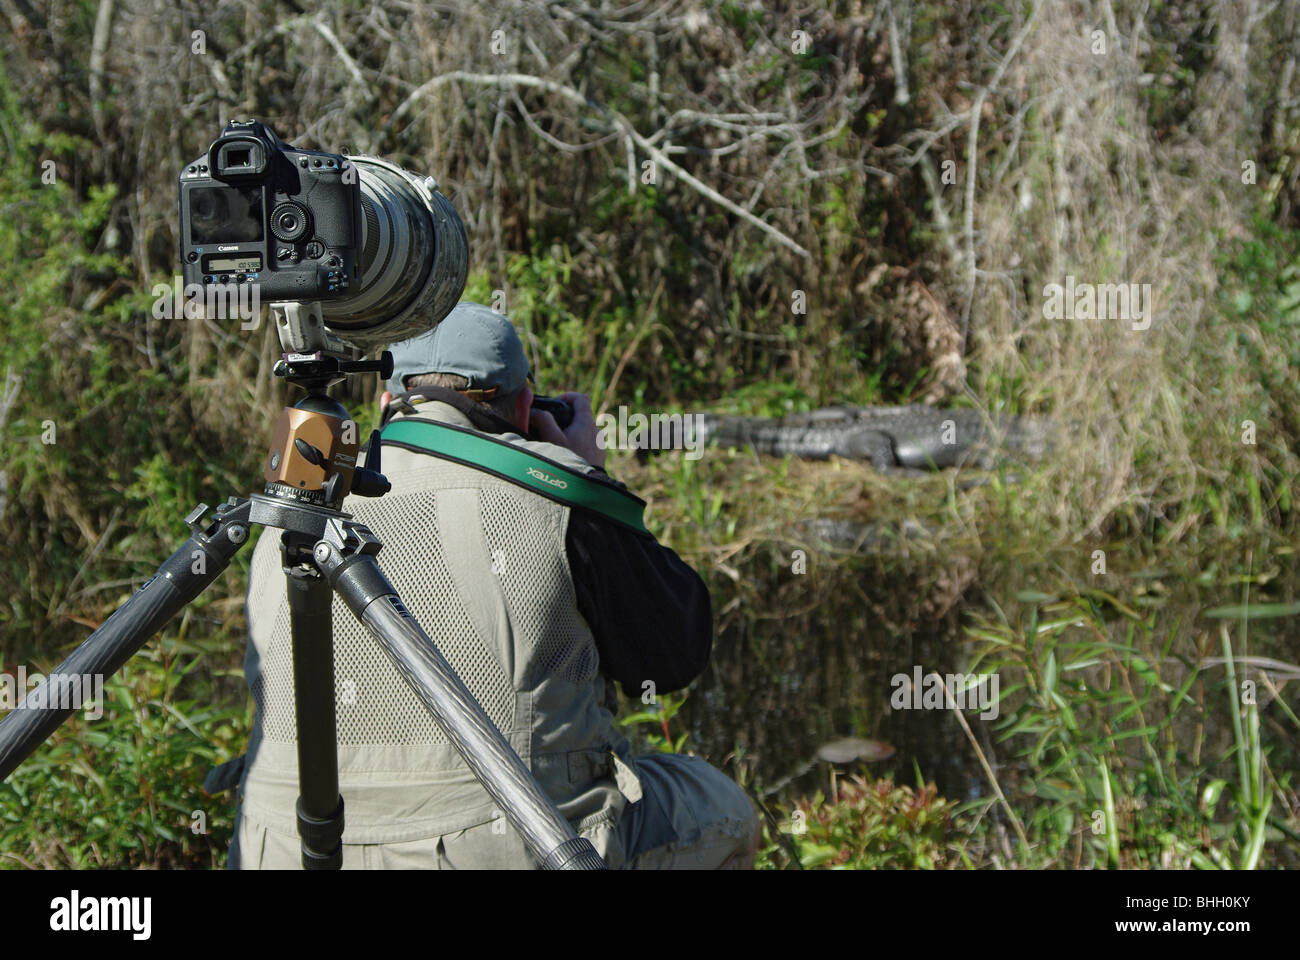 Nature photographer, taking pictures of an alligator in Everglades National Park; Canon Mark camera with long lens on a tripod is in foreground. Stock Photo